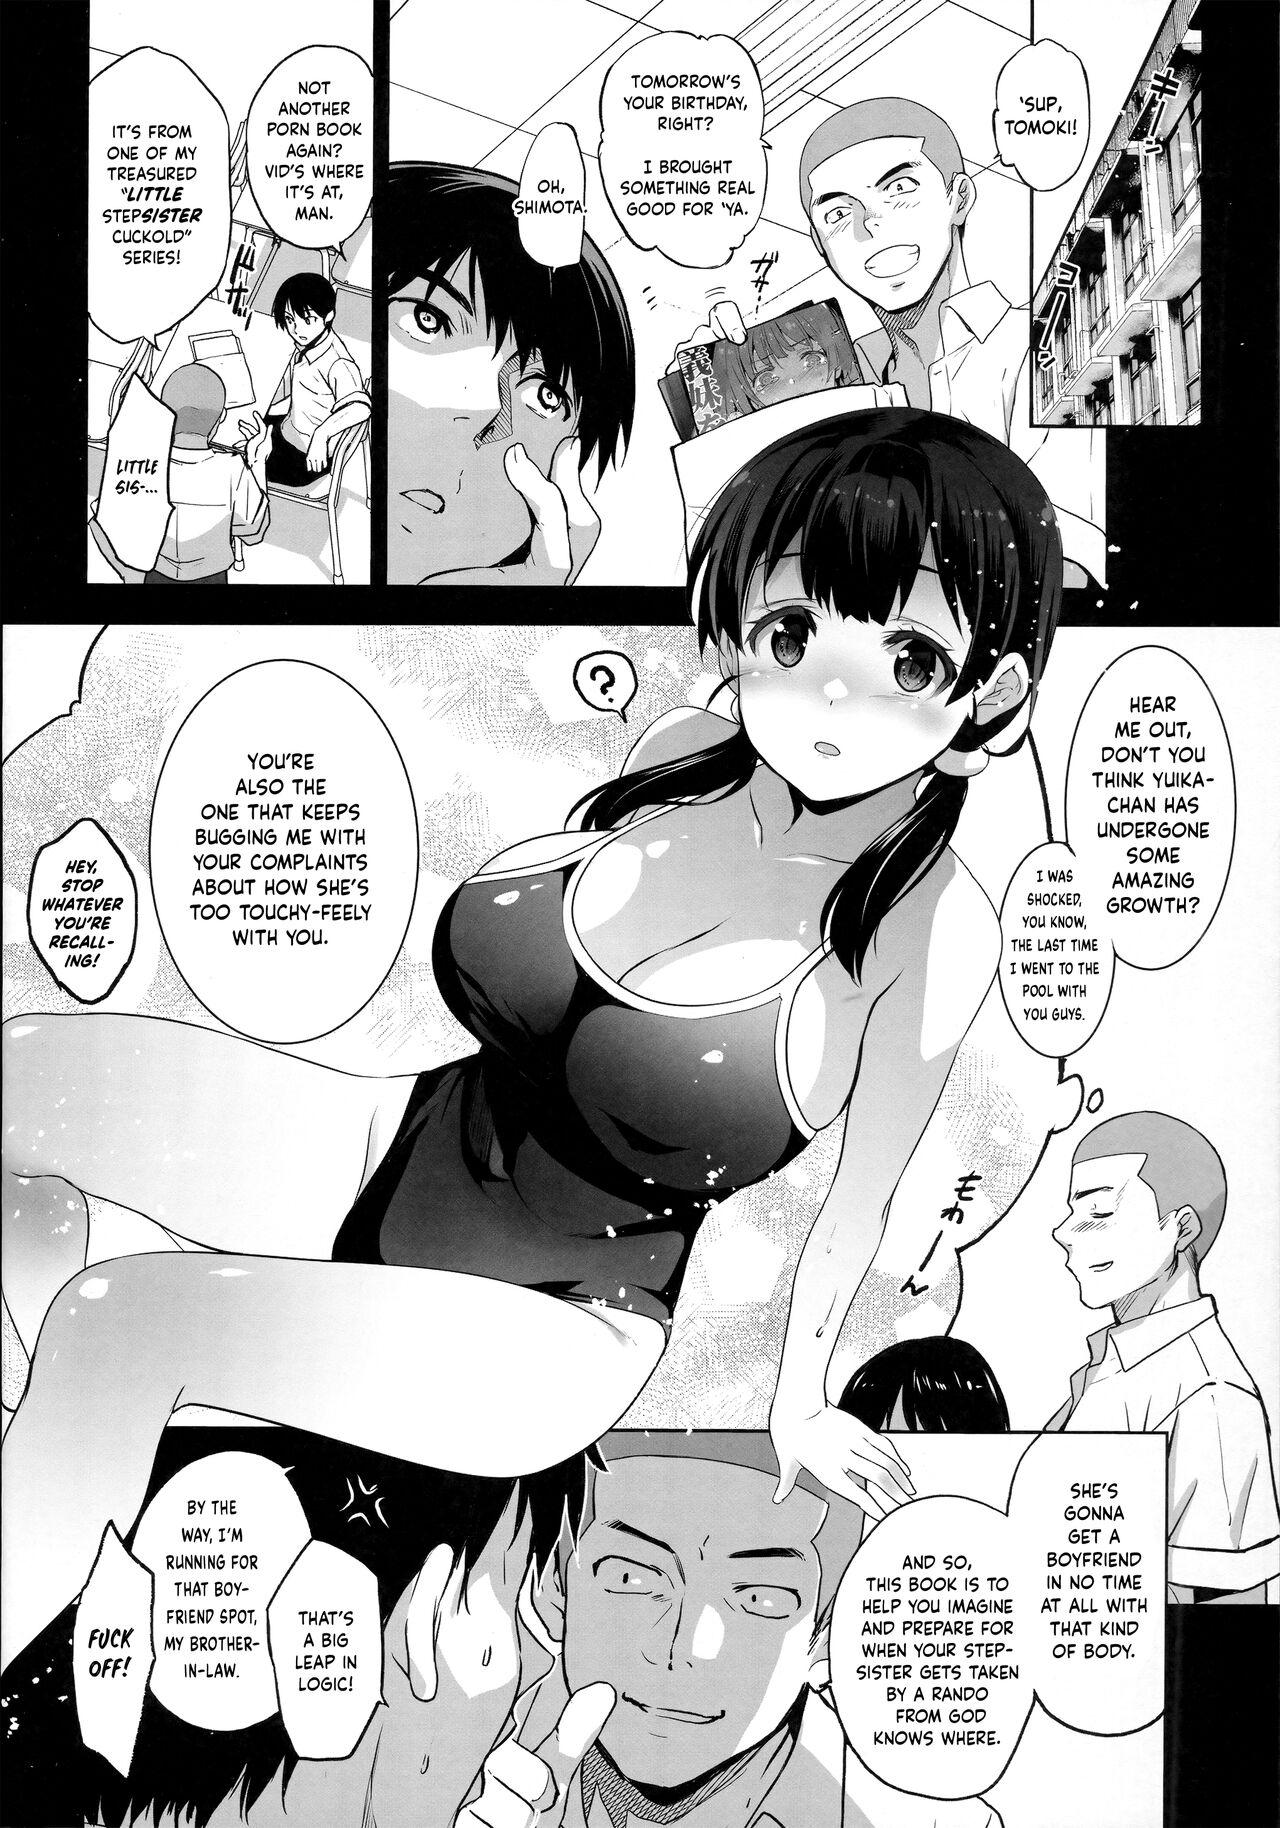 Clothed Imouto ga Boku ni Taninboux o Okutte kuru | My Little Sister Is Sending Me Her Videos Of Getting Fucked By Strangers - Original Sloppy Blow Job - Page 5